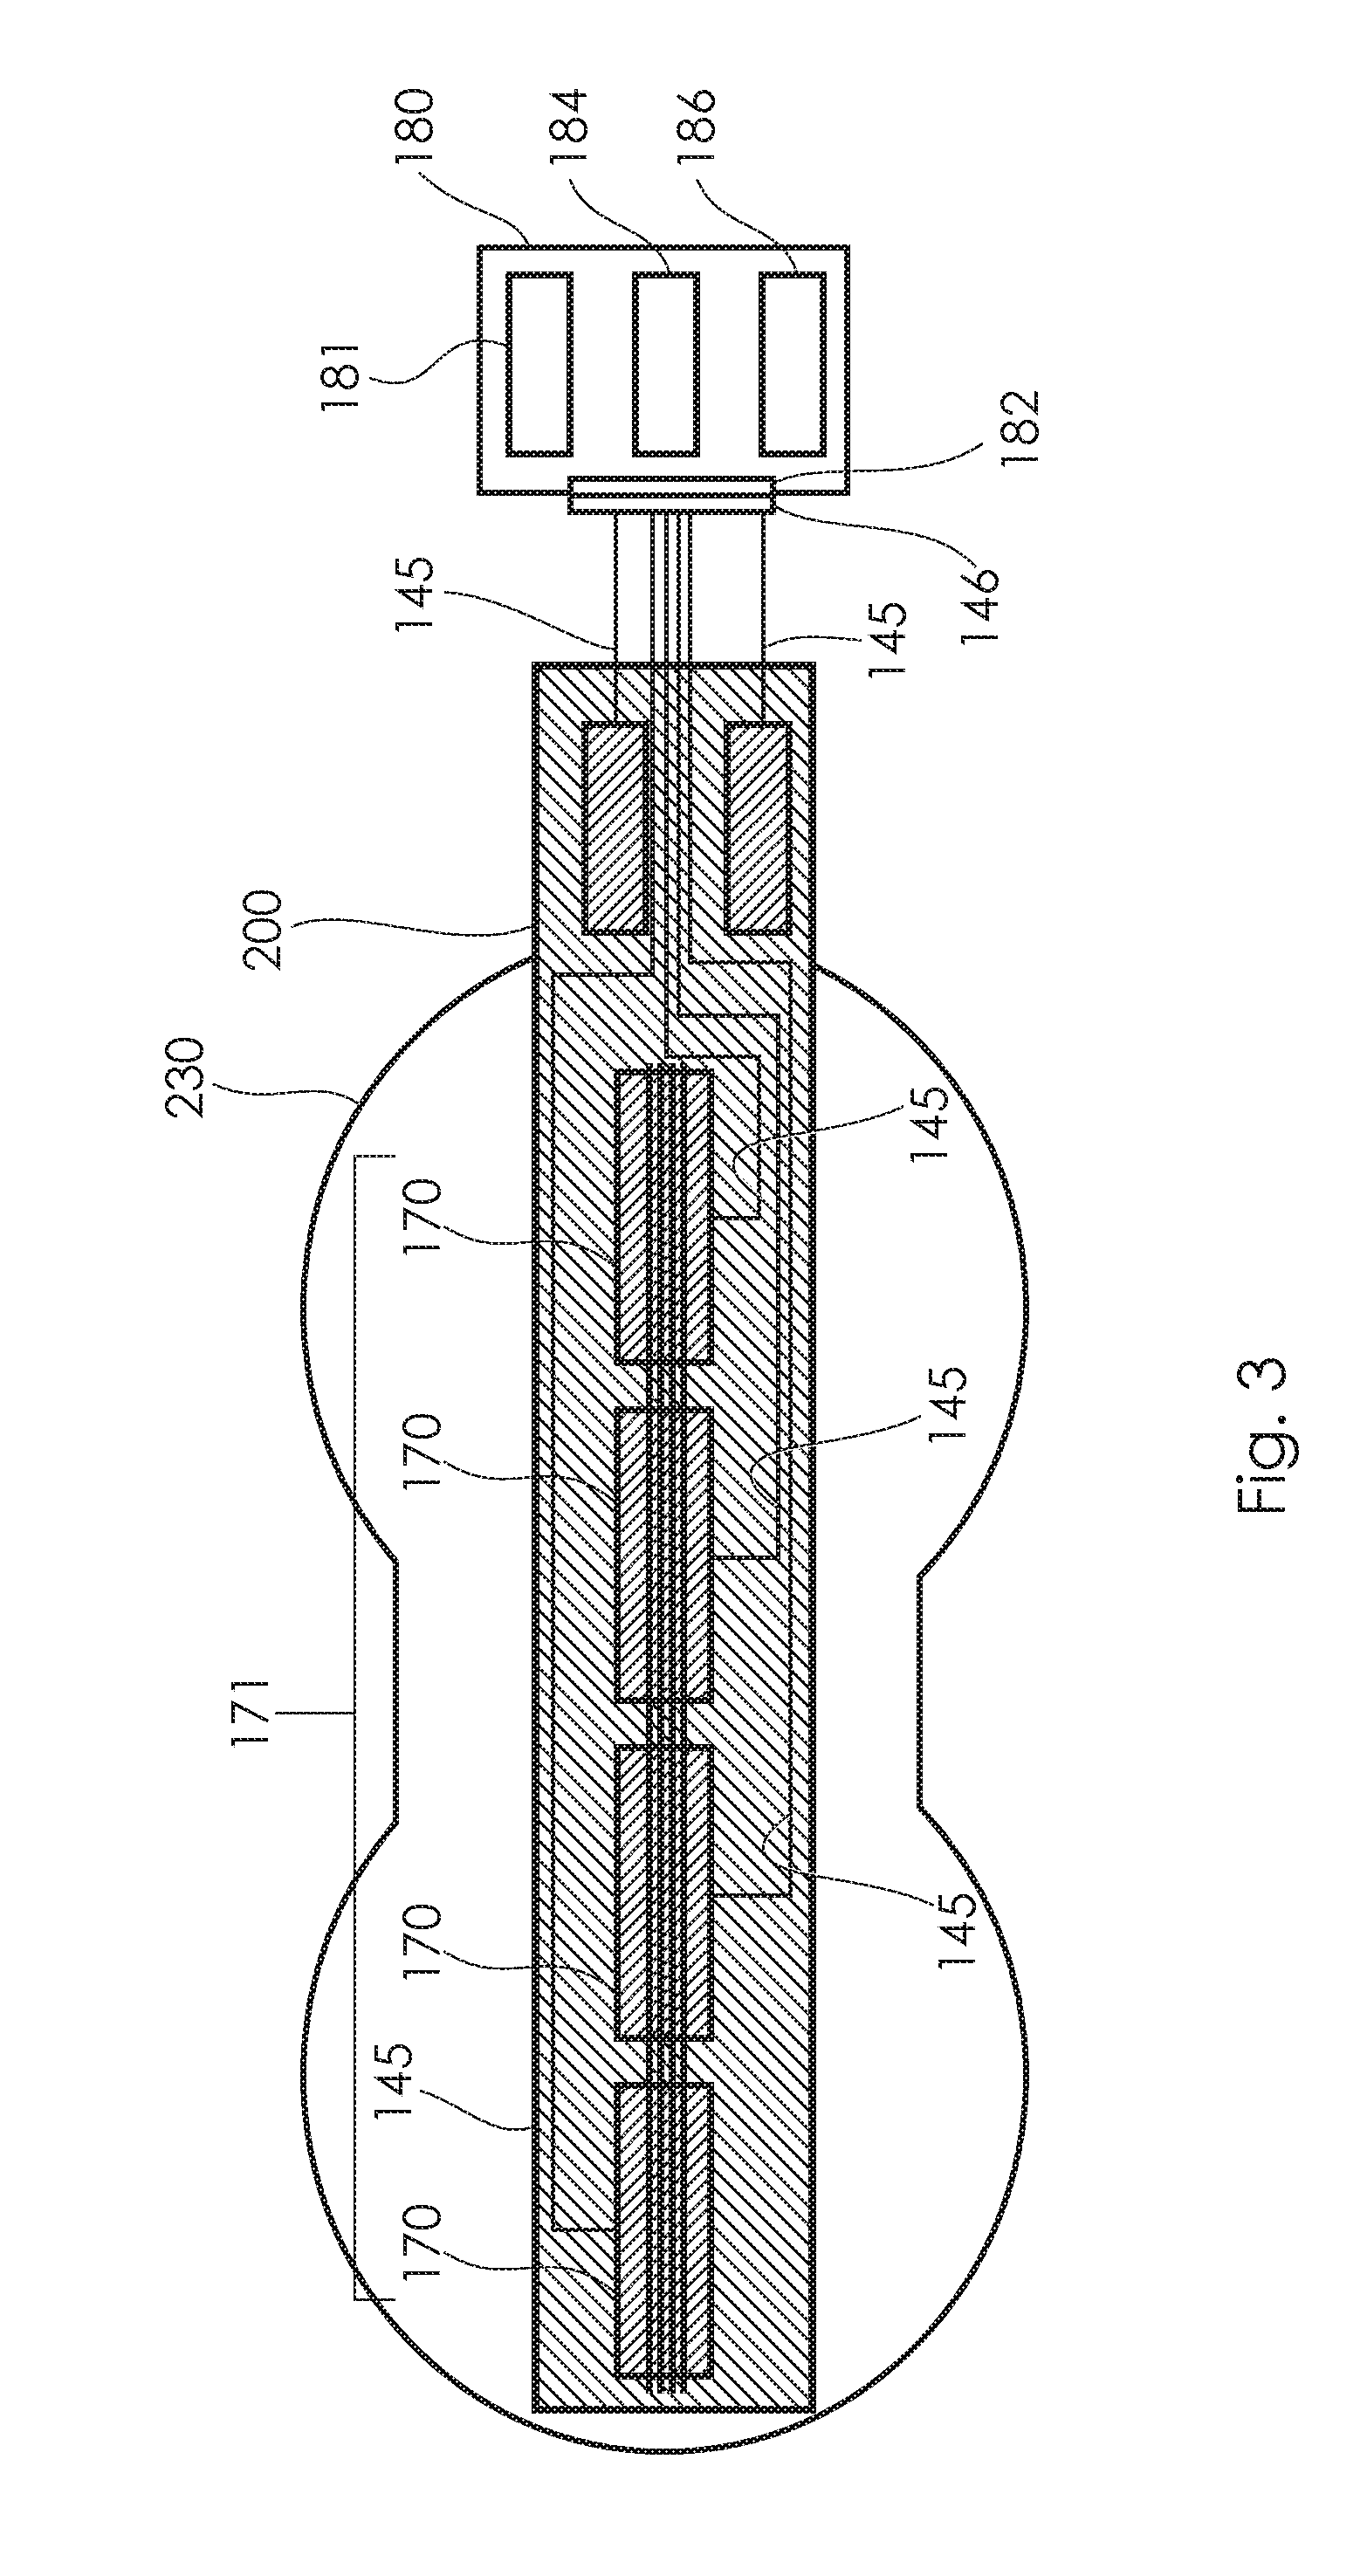 Method and system for volume estimation of bodily outputs in absorbent articles